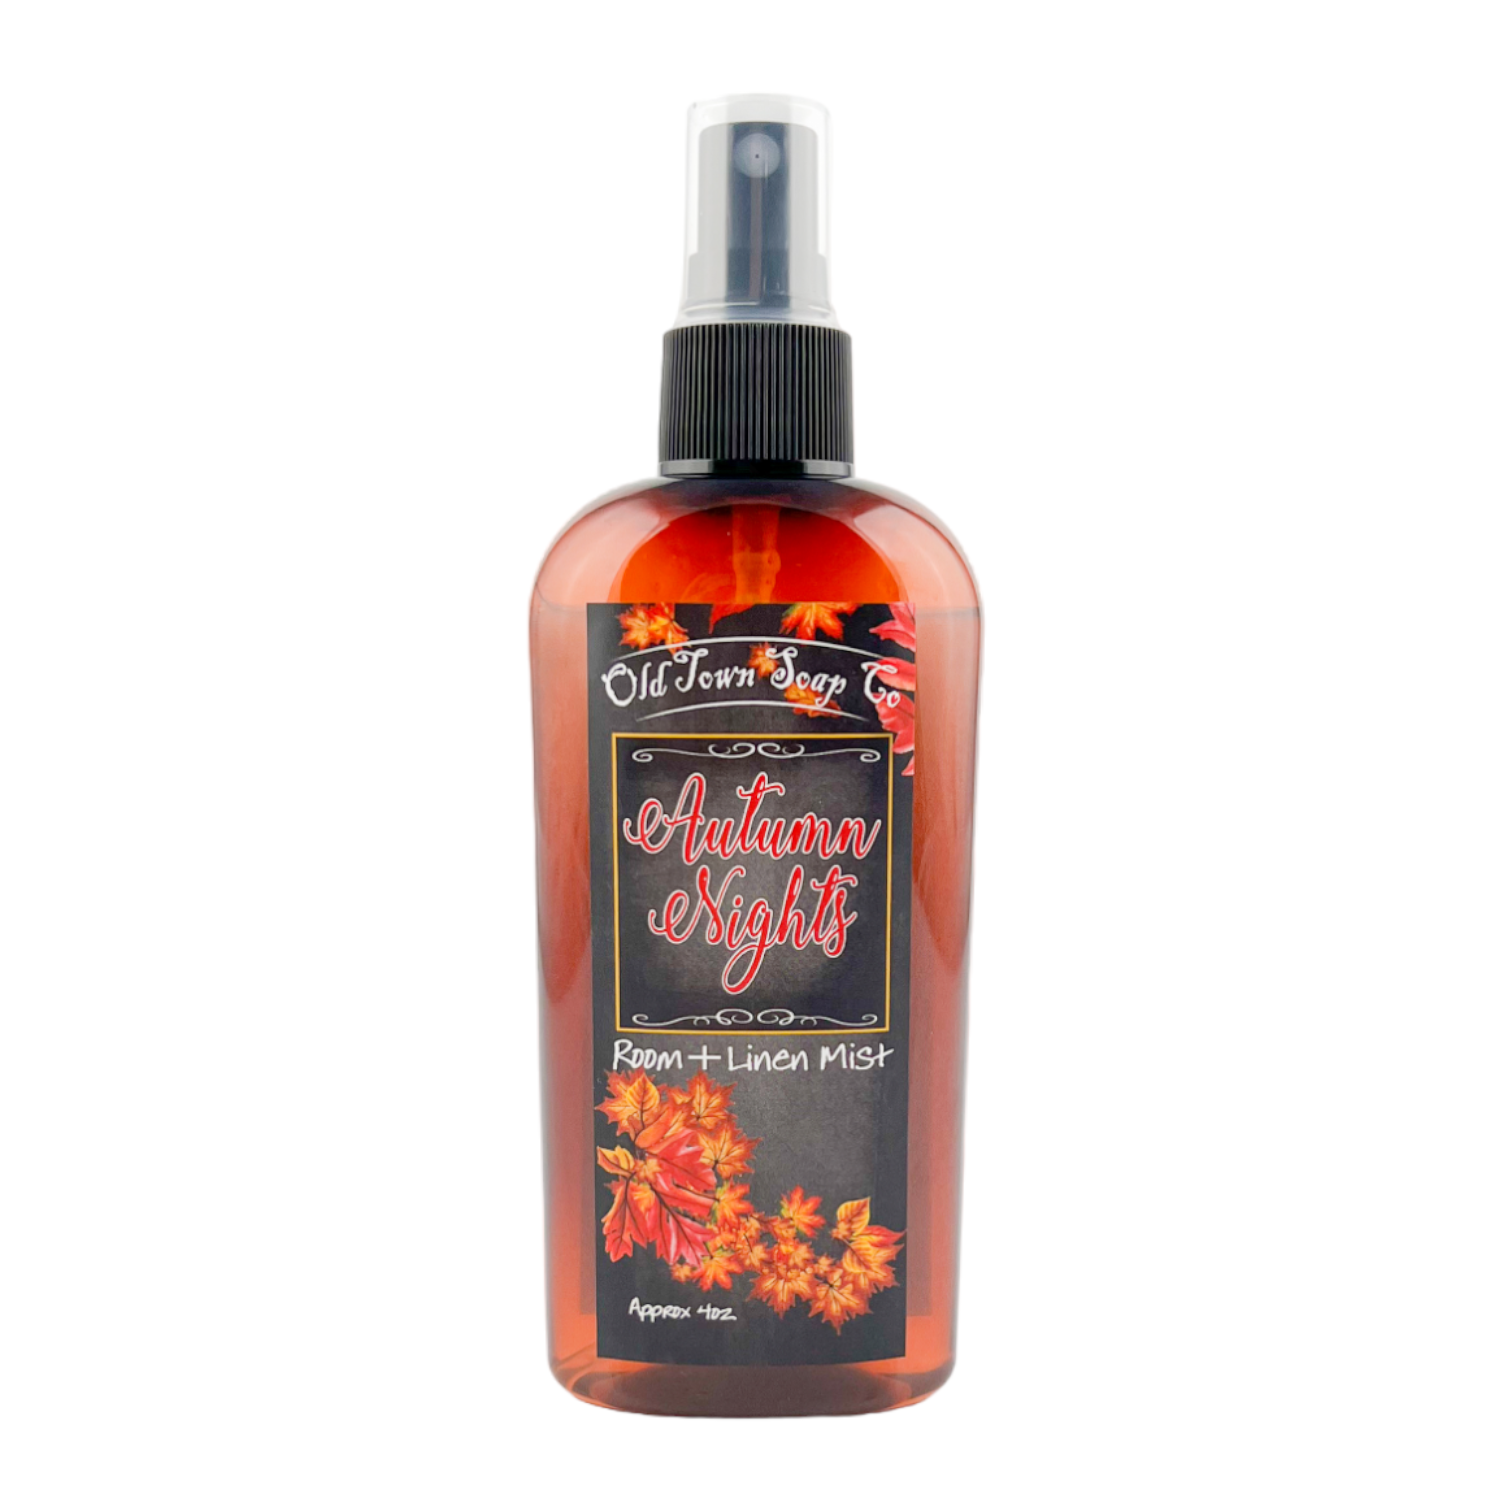 Fall Room+Linen Mists - Avail in 11 Perfect Fall Scents